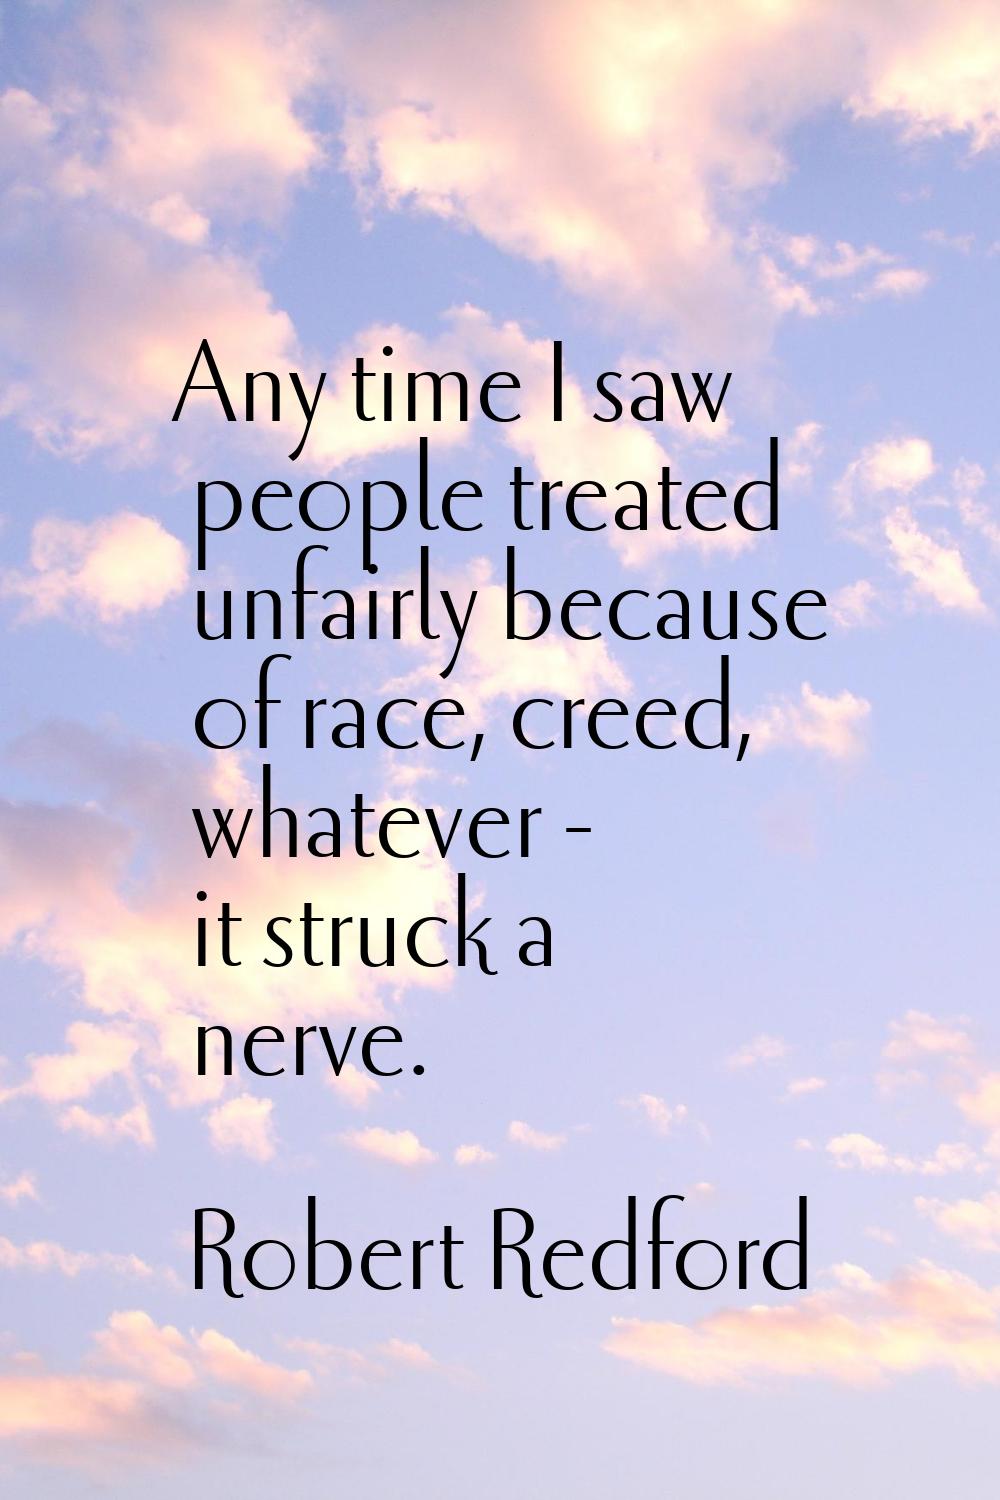 Any time I saw people treated unfairly because of race, creed, whatever - it struck a nerve.